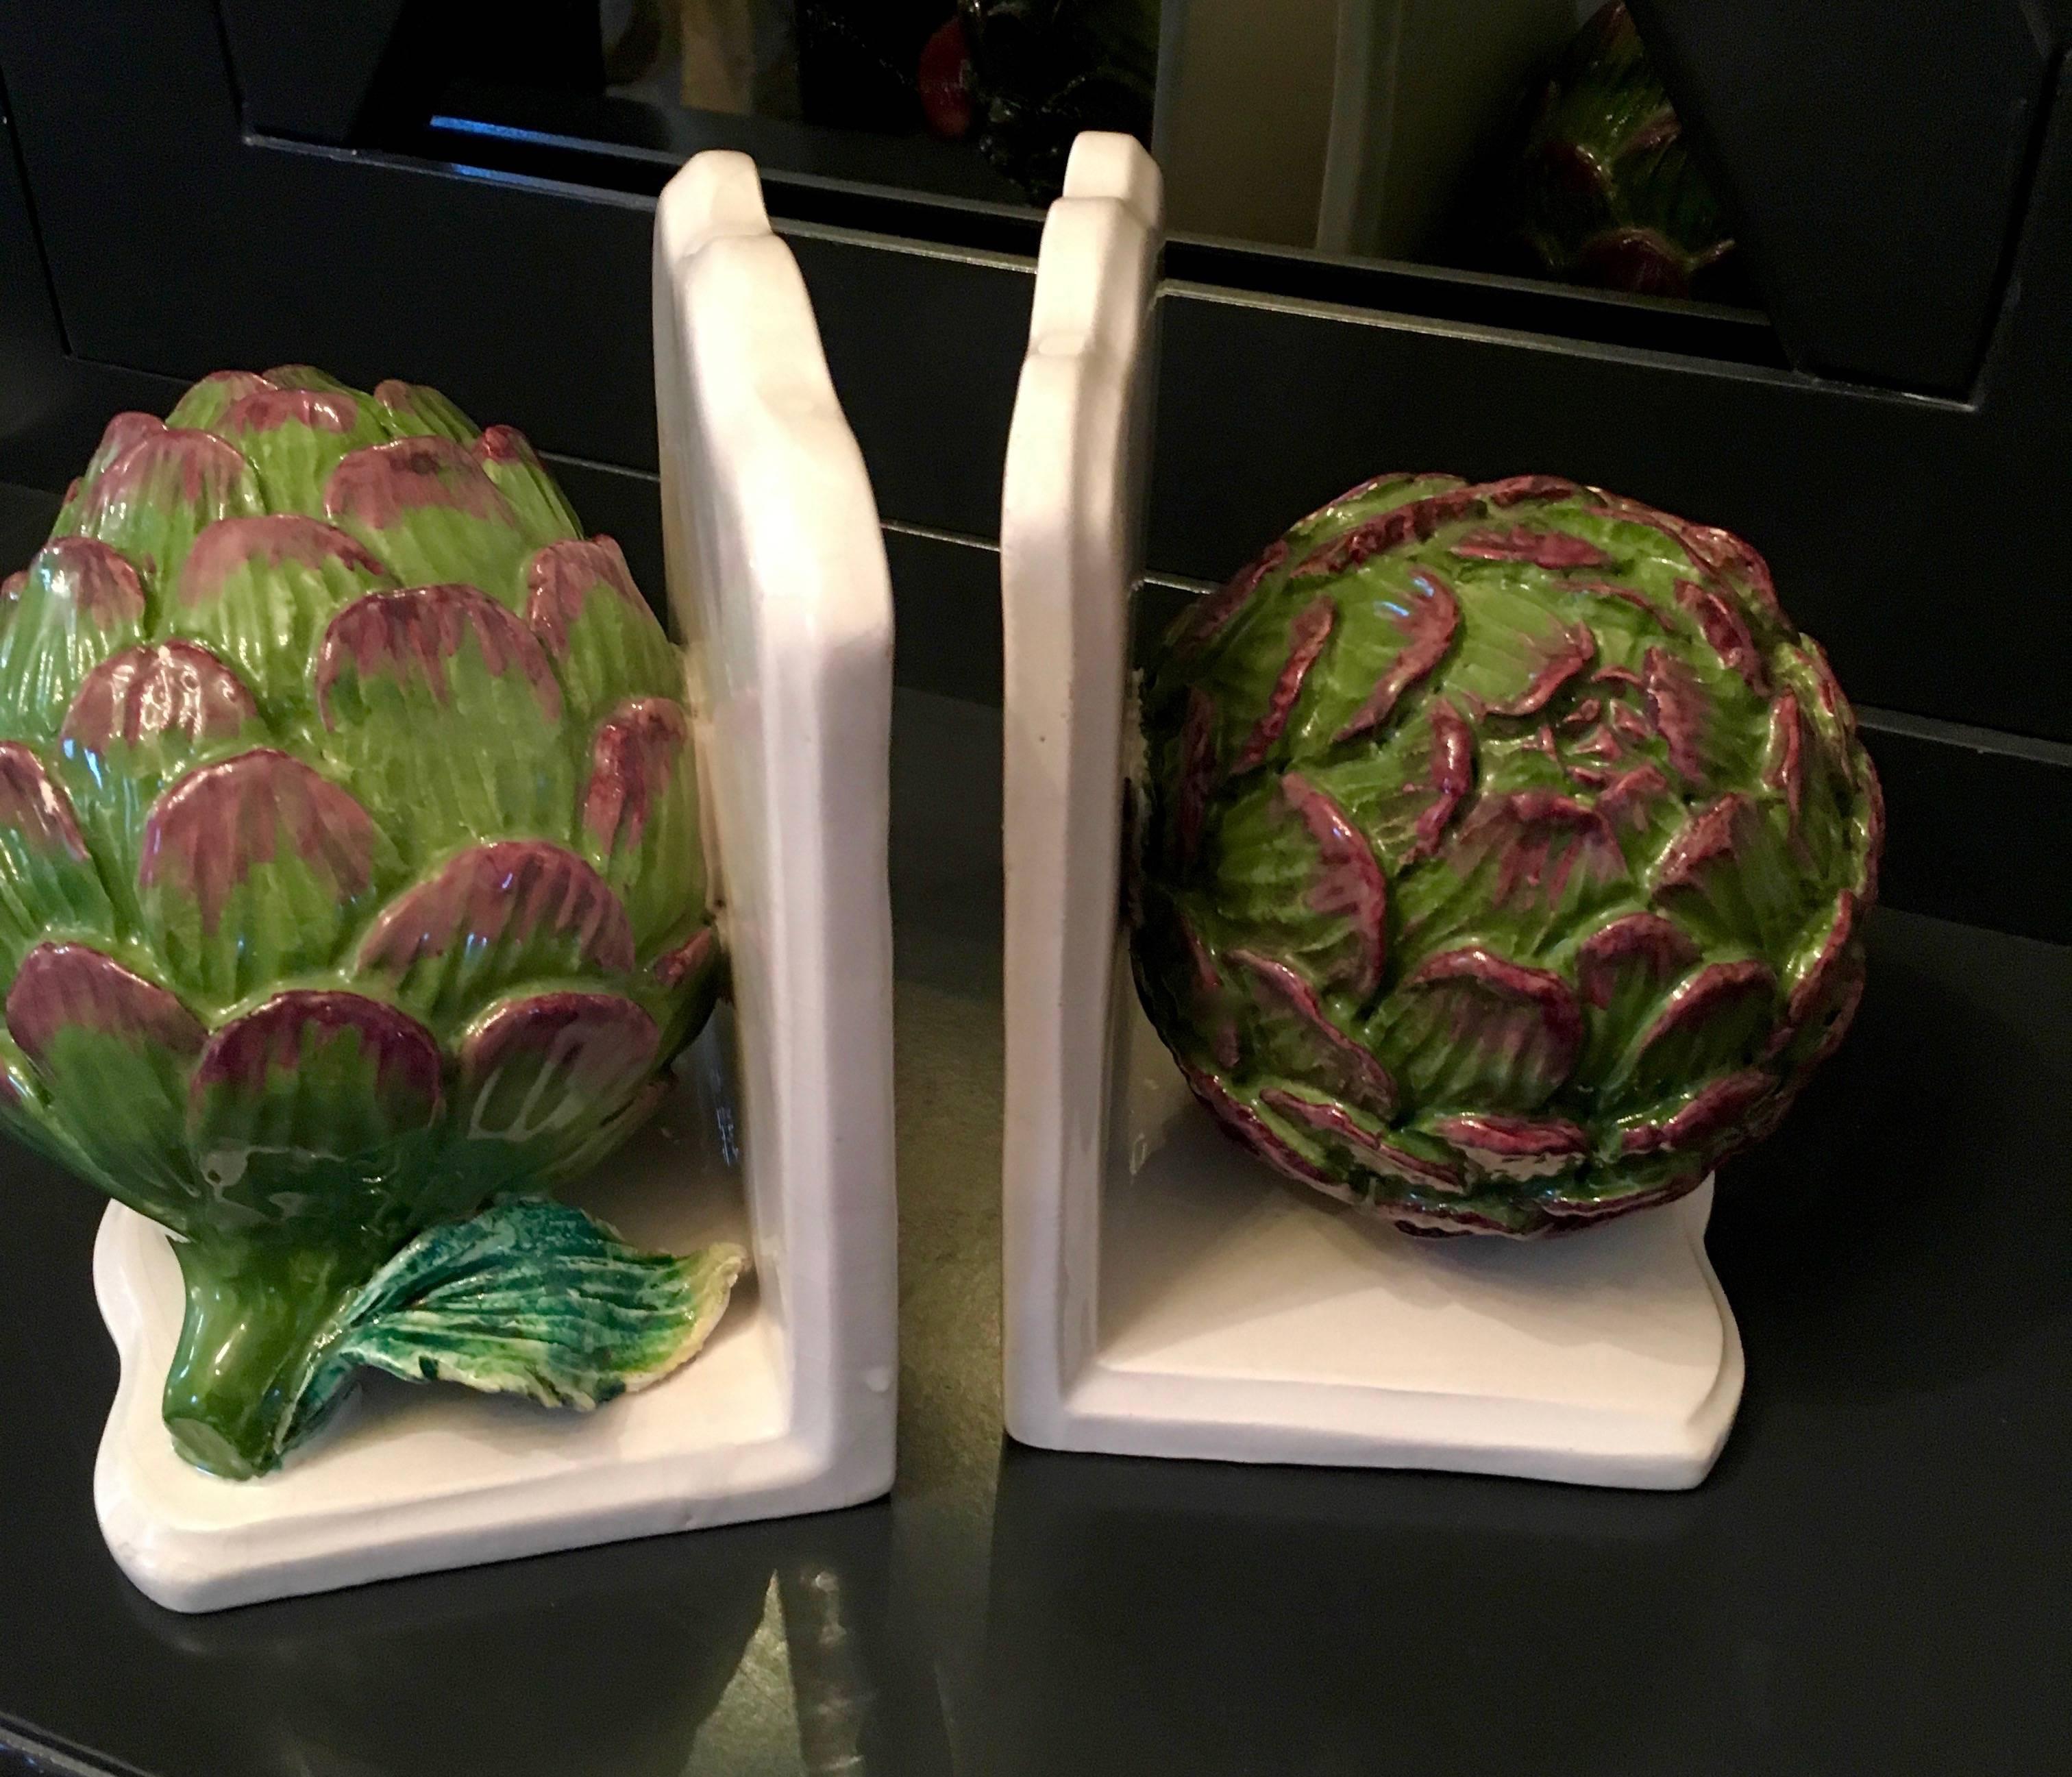 For the Chef who takes pride in, not only their kitchen, but the way they represent their prized Cook books and recipes, a stunning pair of Italian Ceramic Artichokes, a couple of minor chips have been touched up and are non-noticeable (very small).